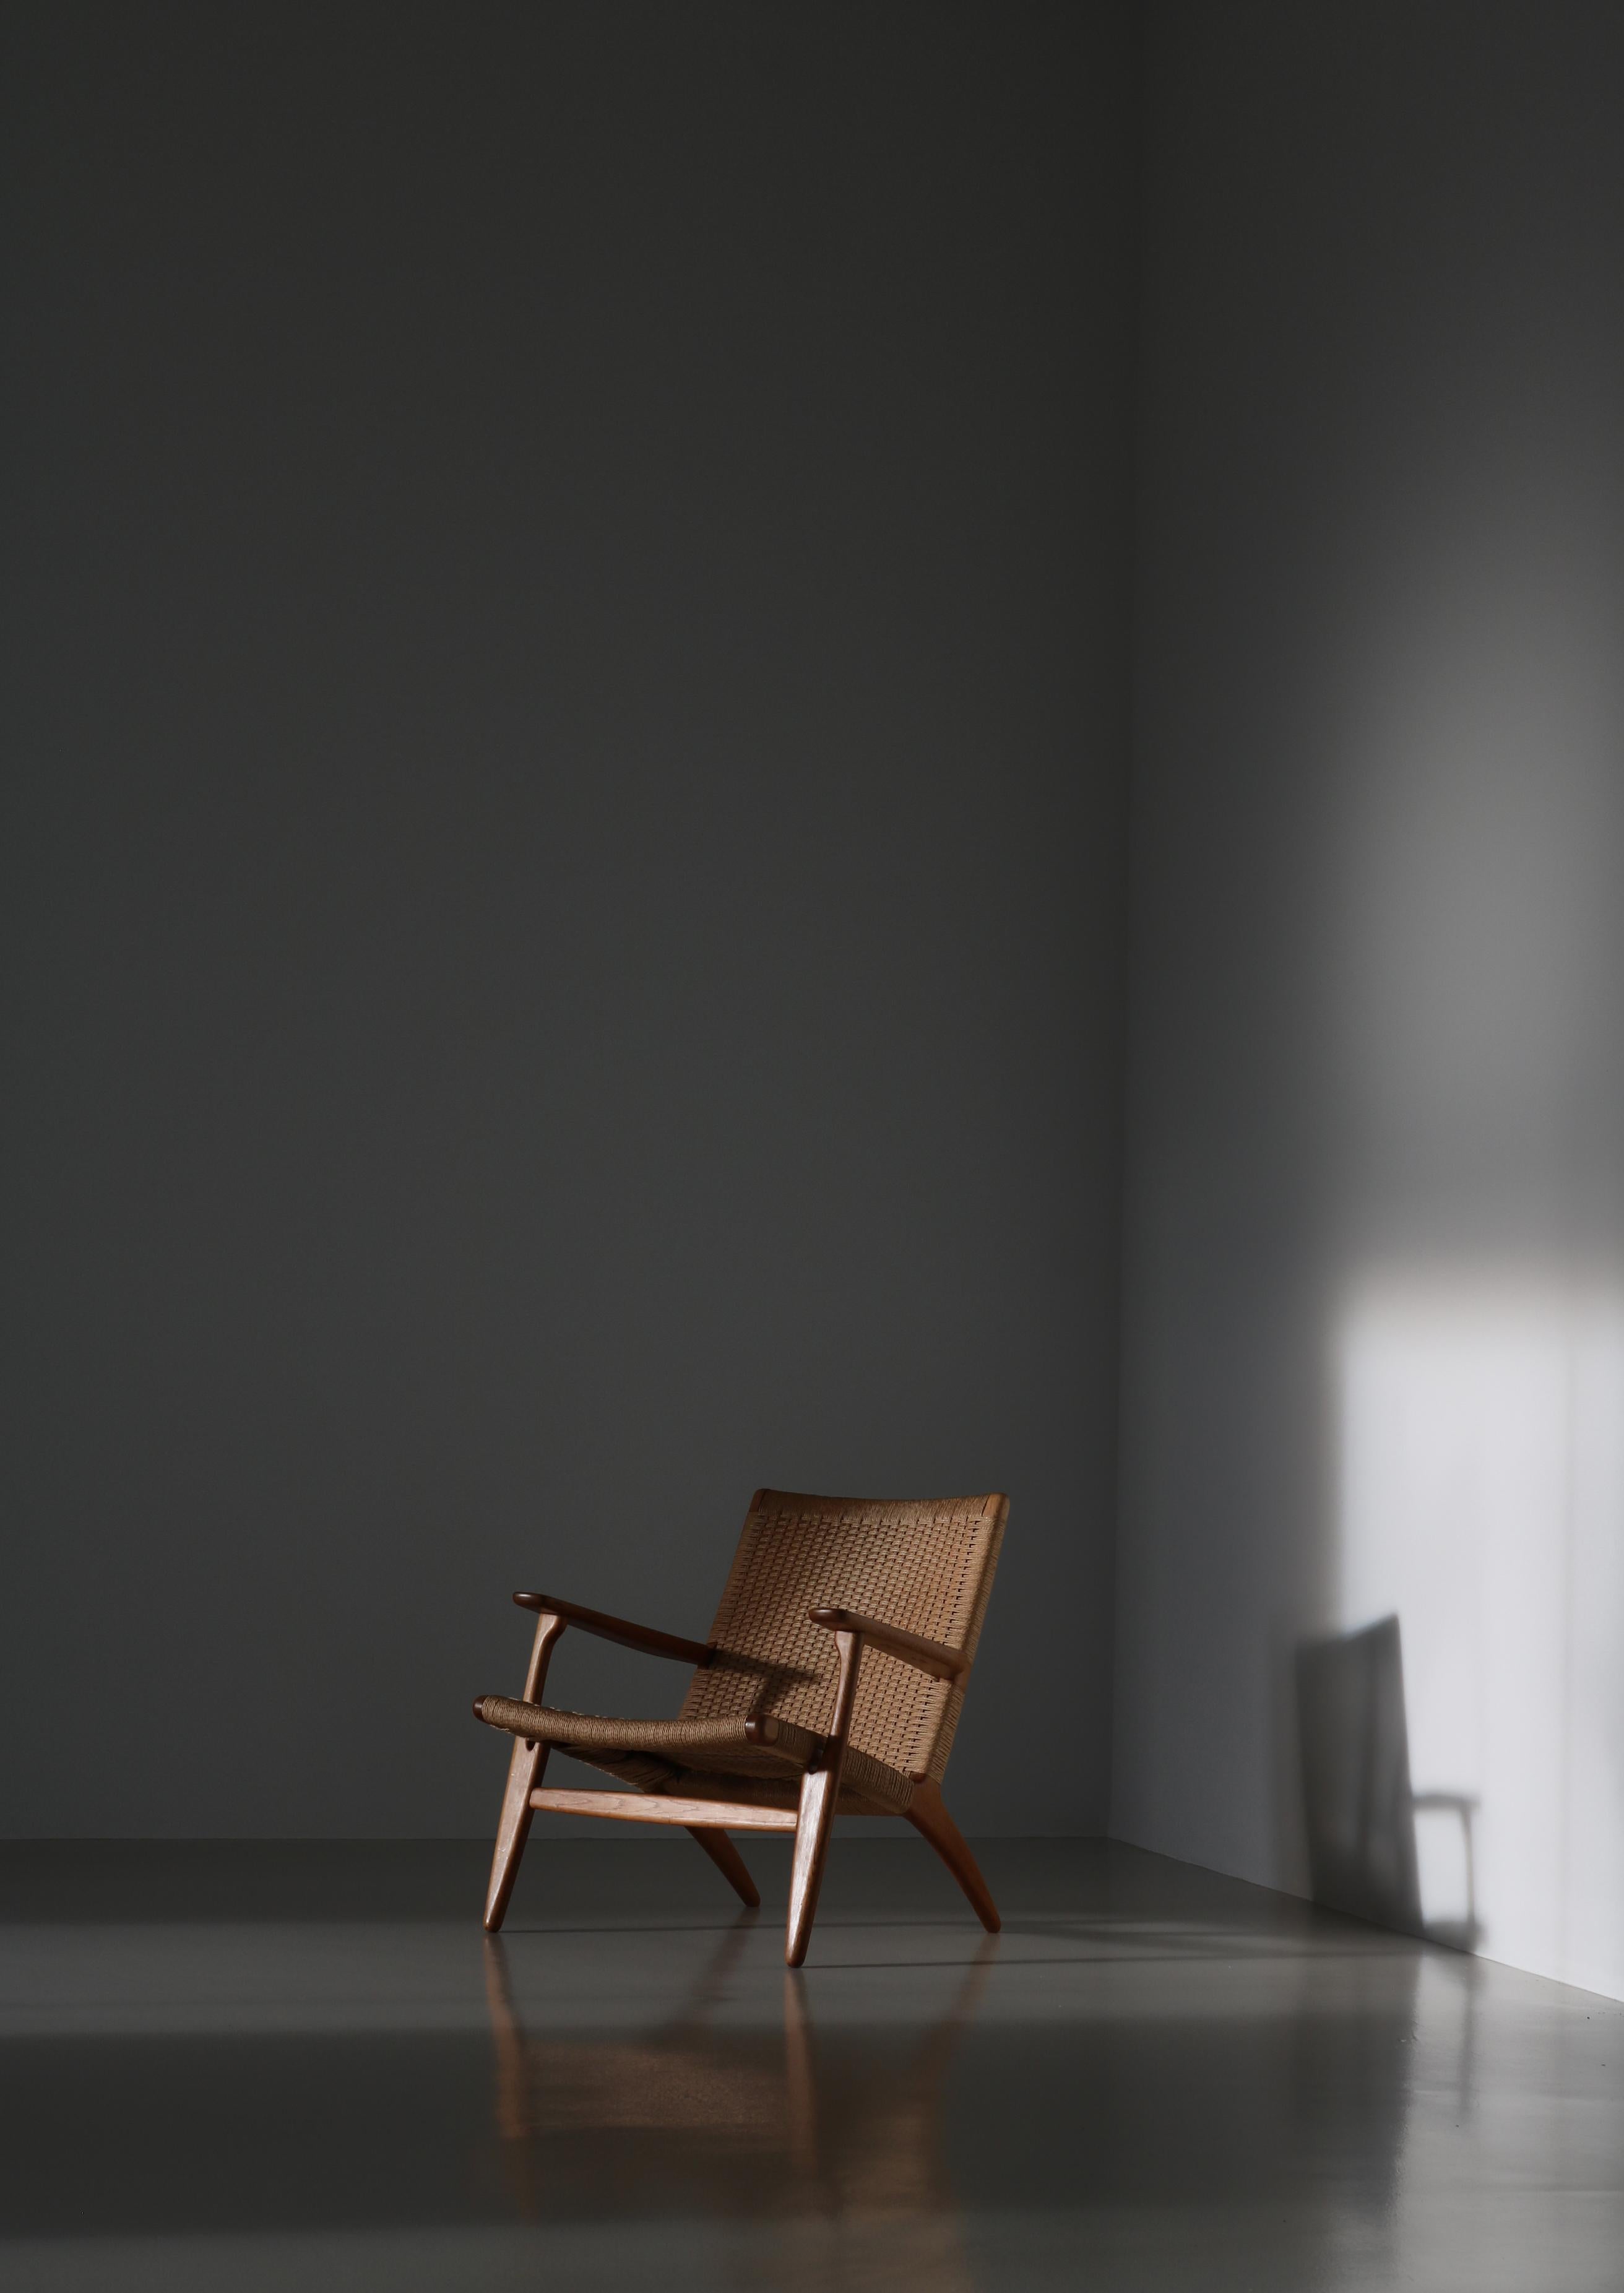 Rare early edition lounge chair model CH25 by Danish designer Hans J. Wegner for Carl Hansen & Son in oakwood and woven paper cord. The CH25 is one of the first four chairs Hans J. Wegner created for Carl Hansen & Søn at the beginning of the